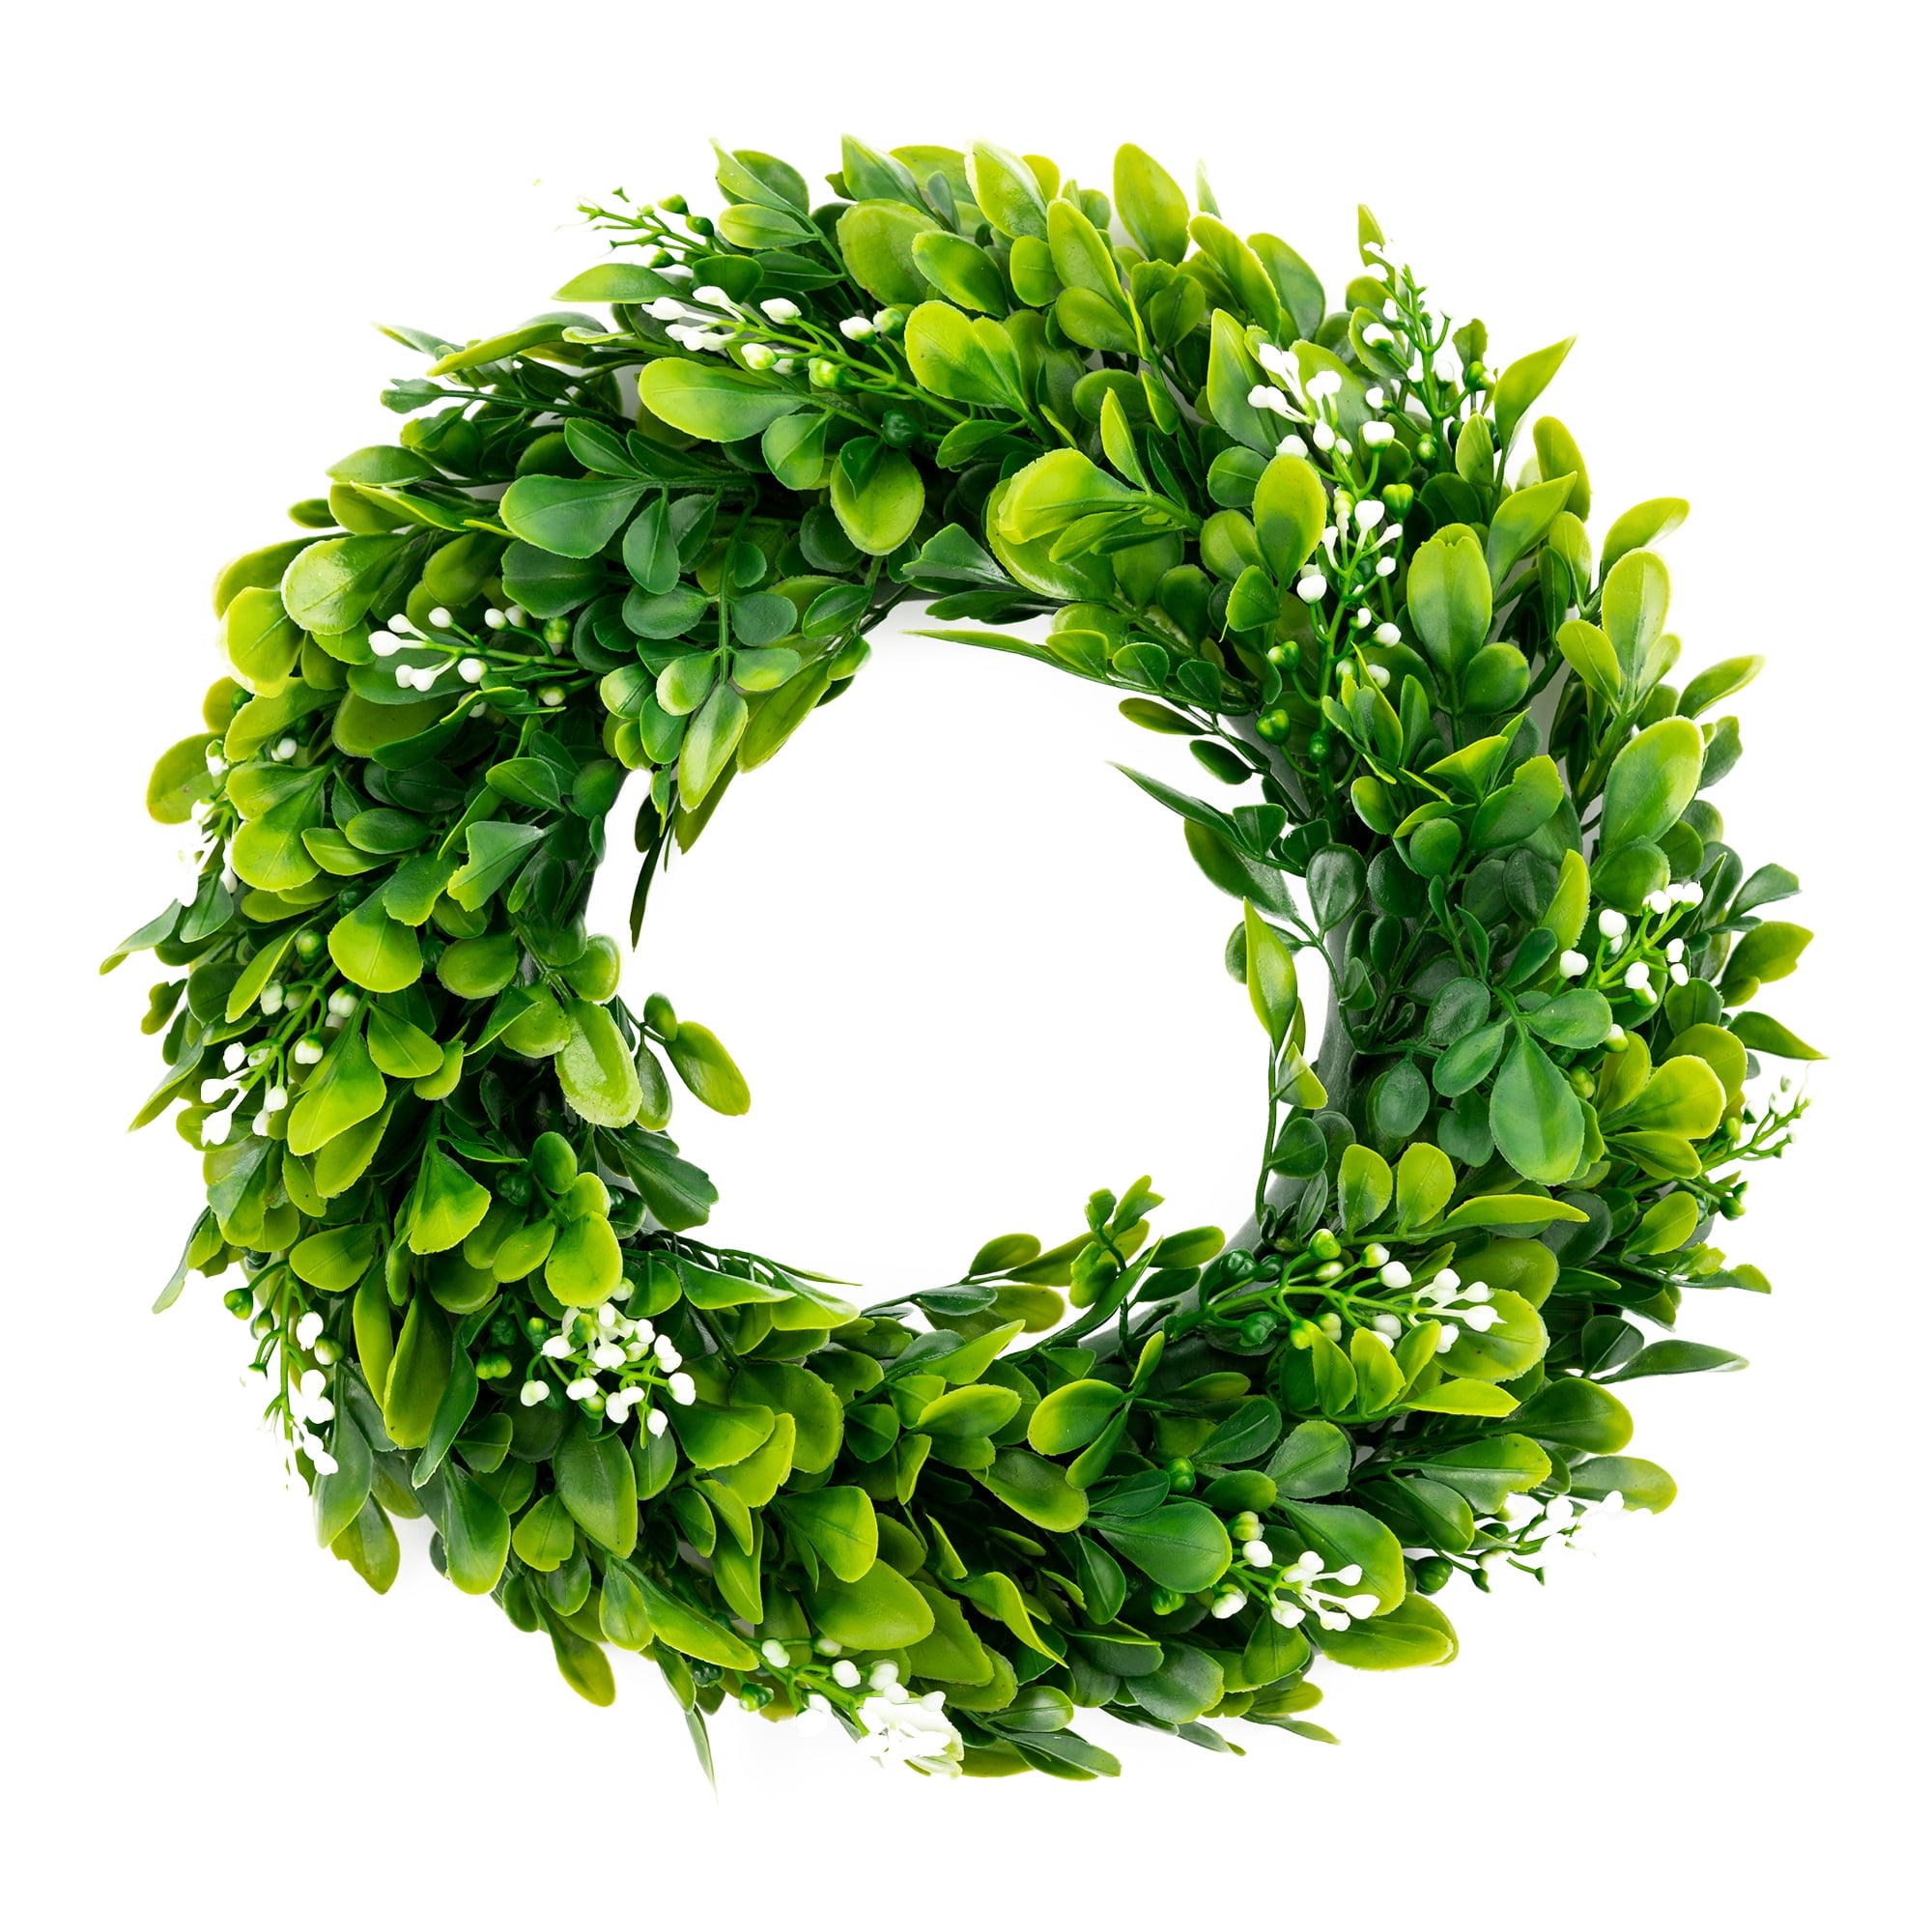 Artificial Green Wreath for Outdoor Mini Boxwood Wreath Farmhouse Wreath for Front Door 18 inch Wreath Window Wreath for Home Spring Decoration Outdoor